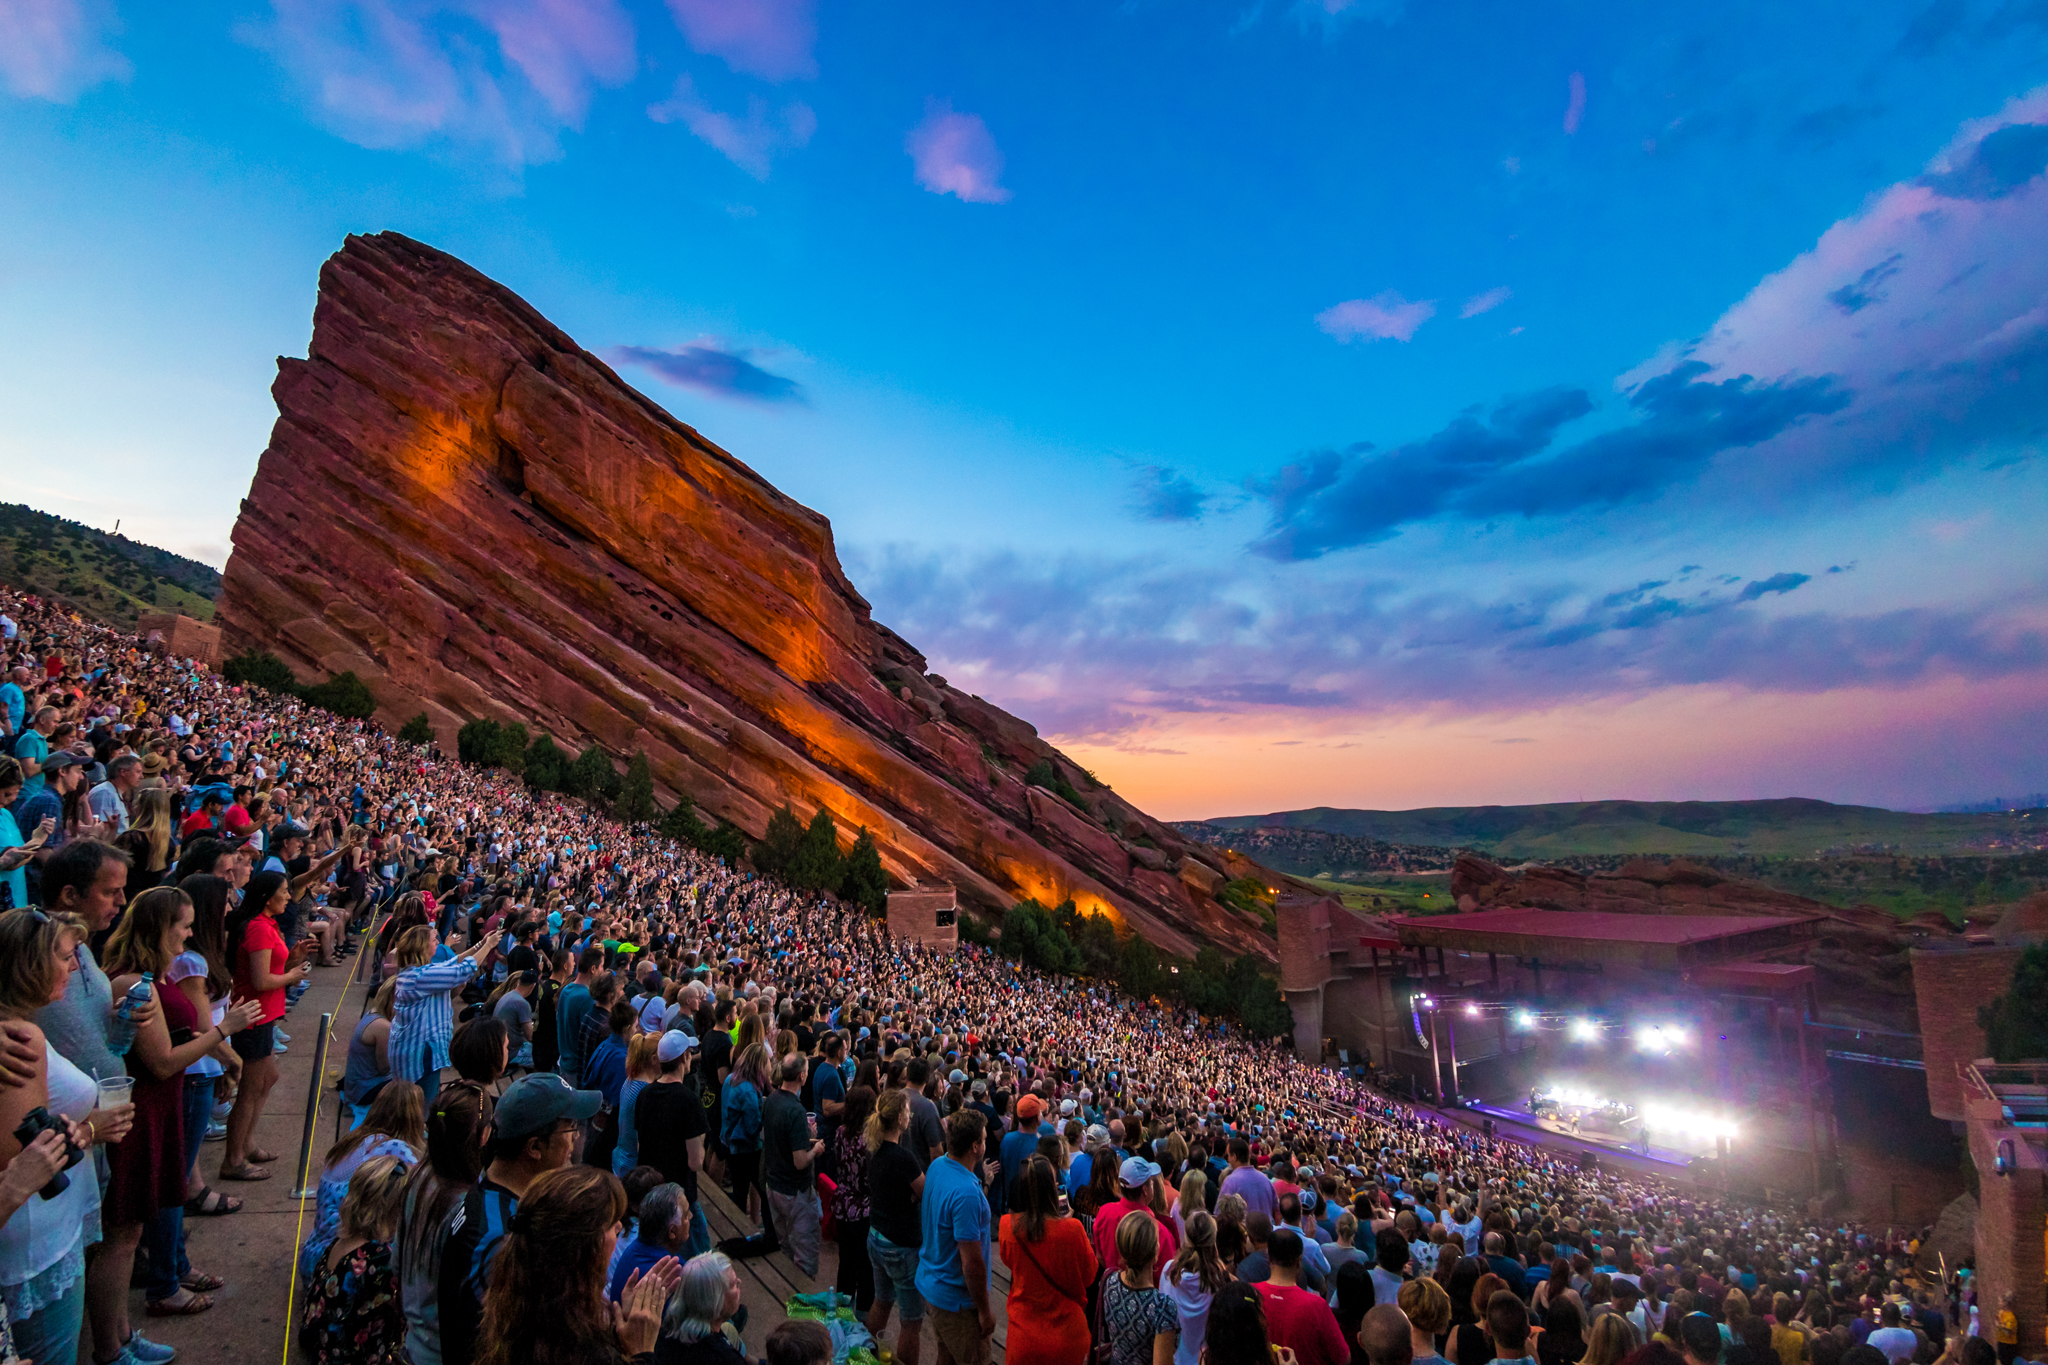 Red Rocks Amphitheatre during a concert at sunset 